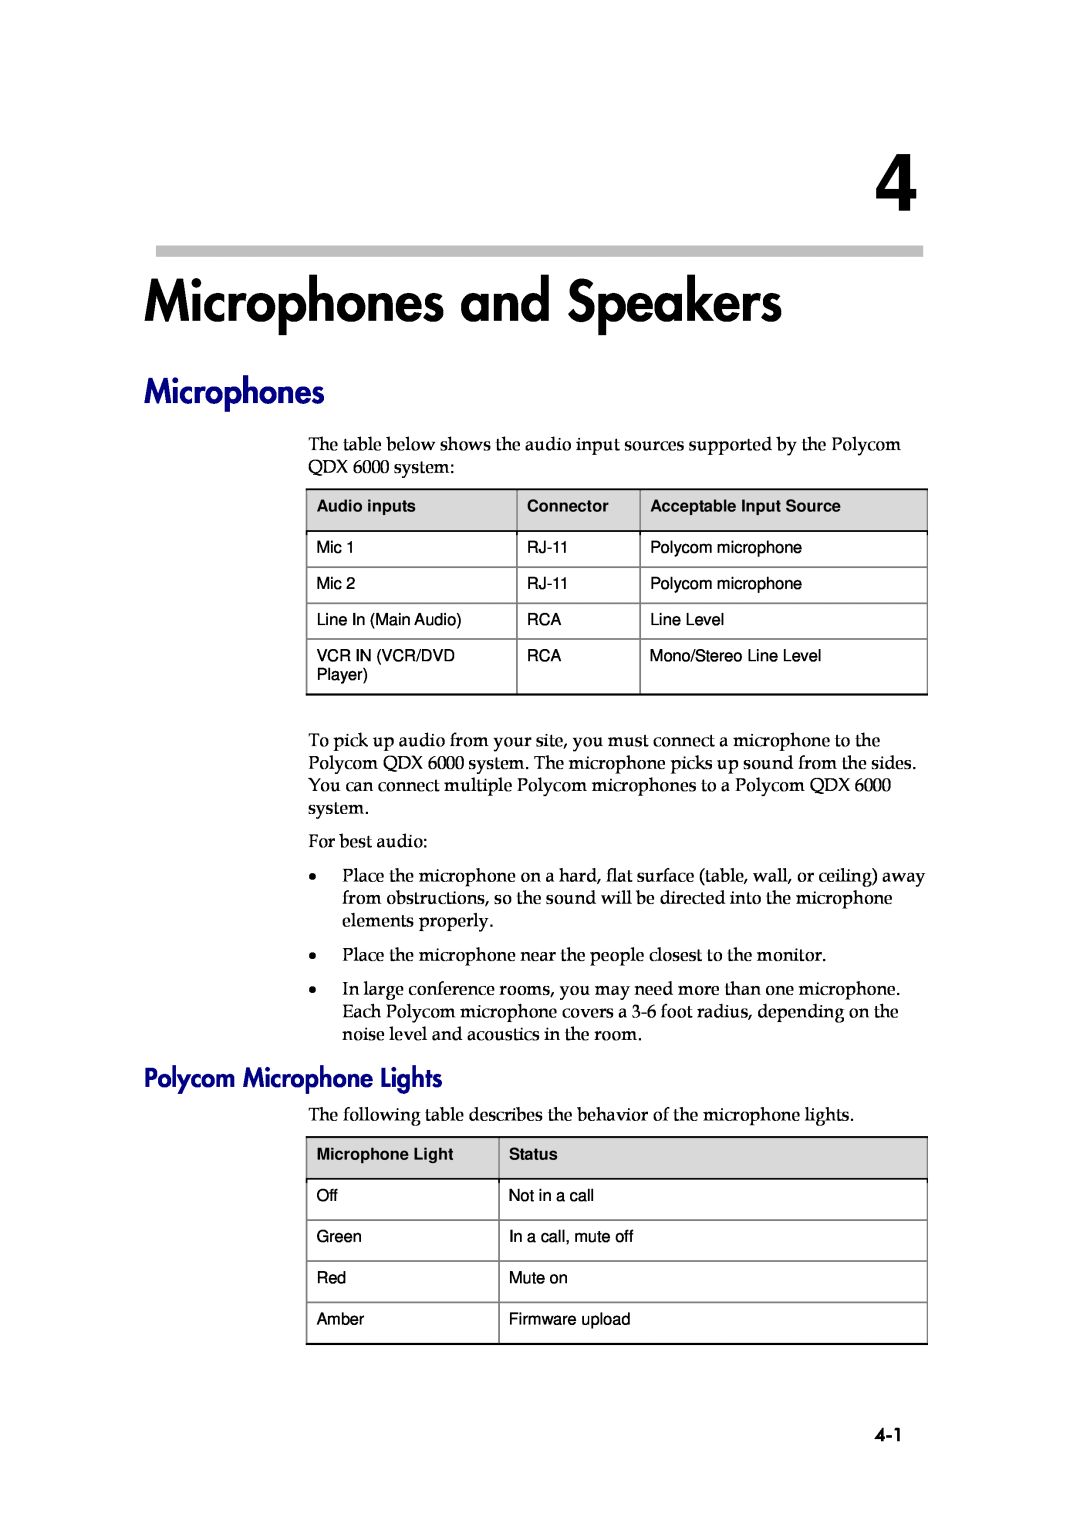 Polycom 6000 manual Microphones and Speakers, Polycom Microphone Lights 